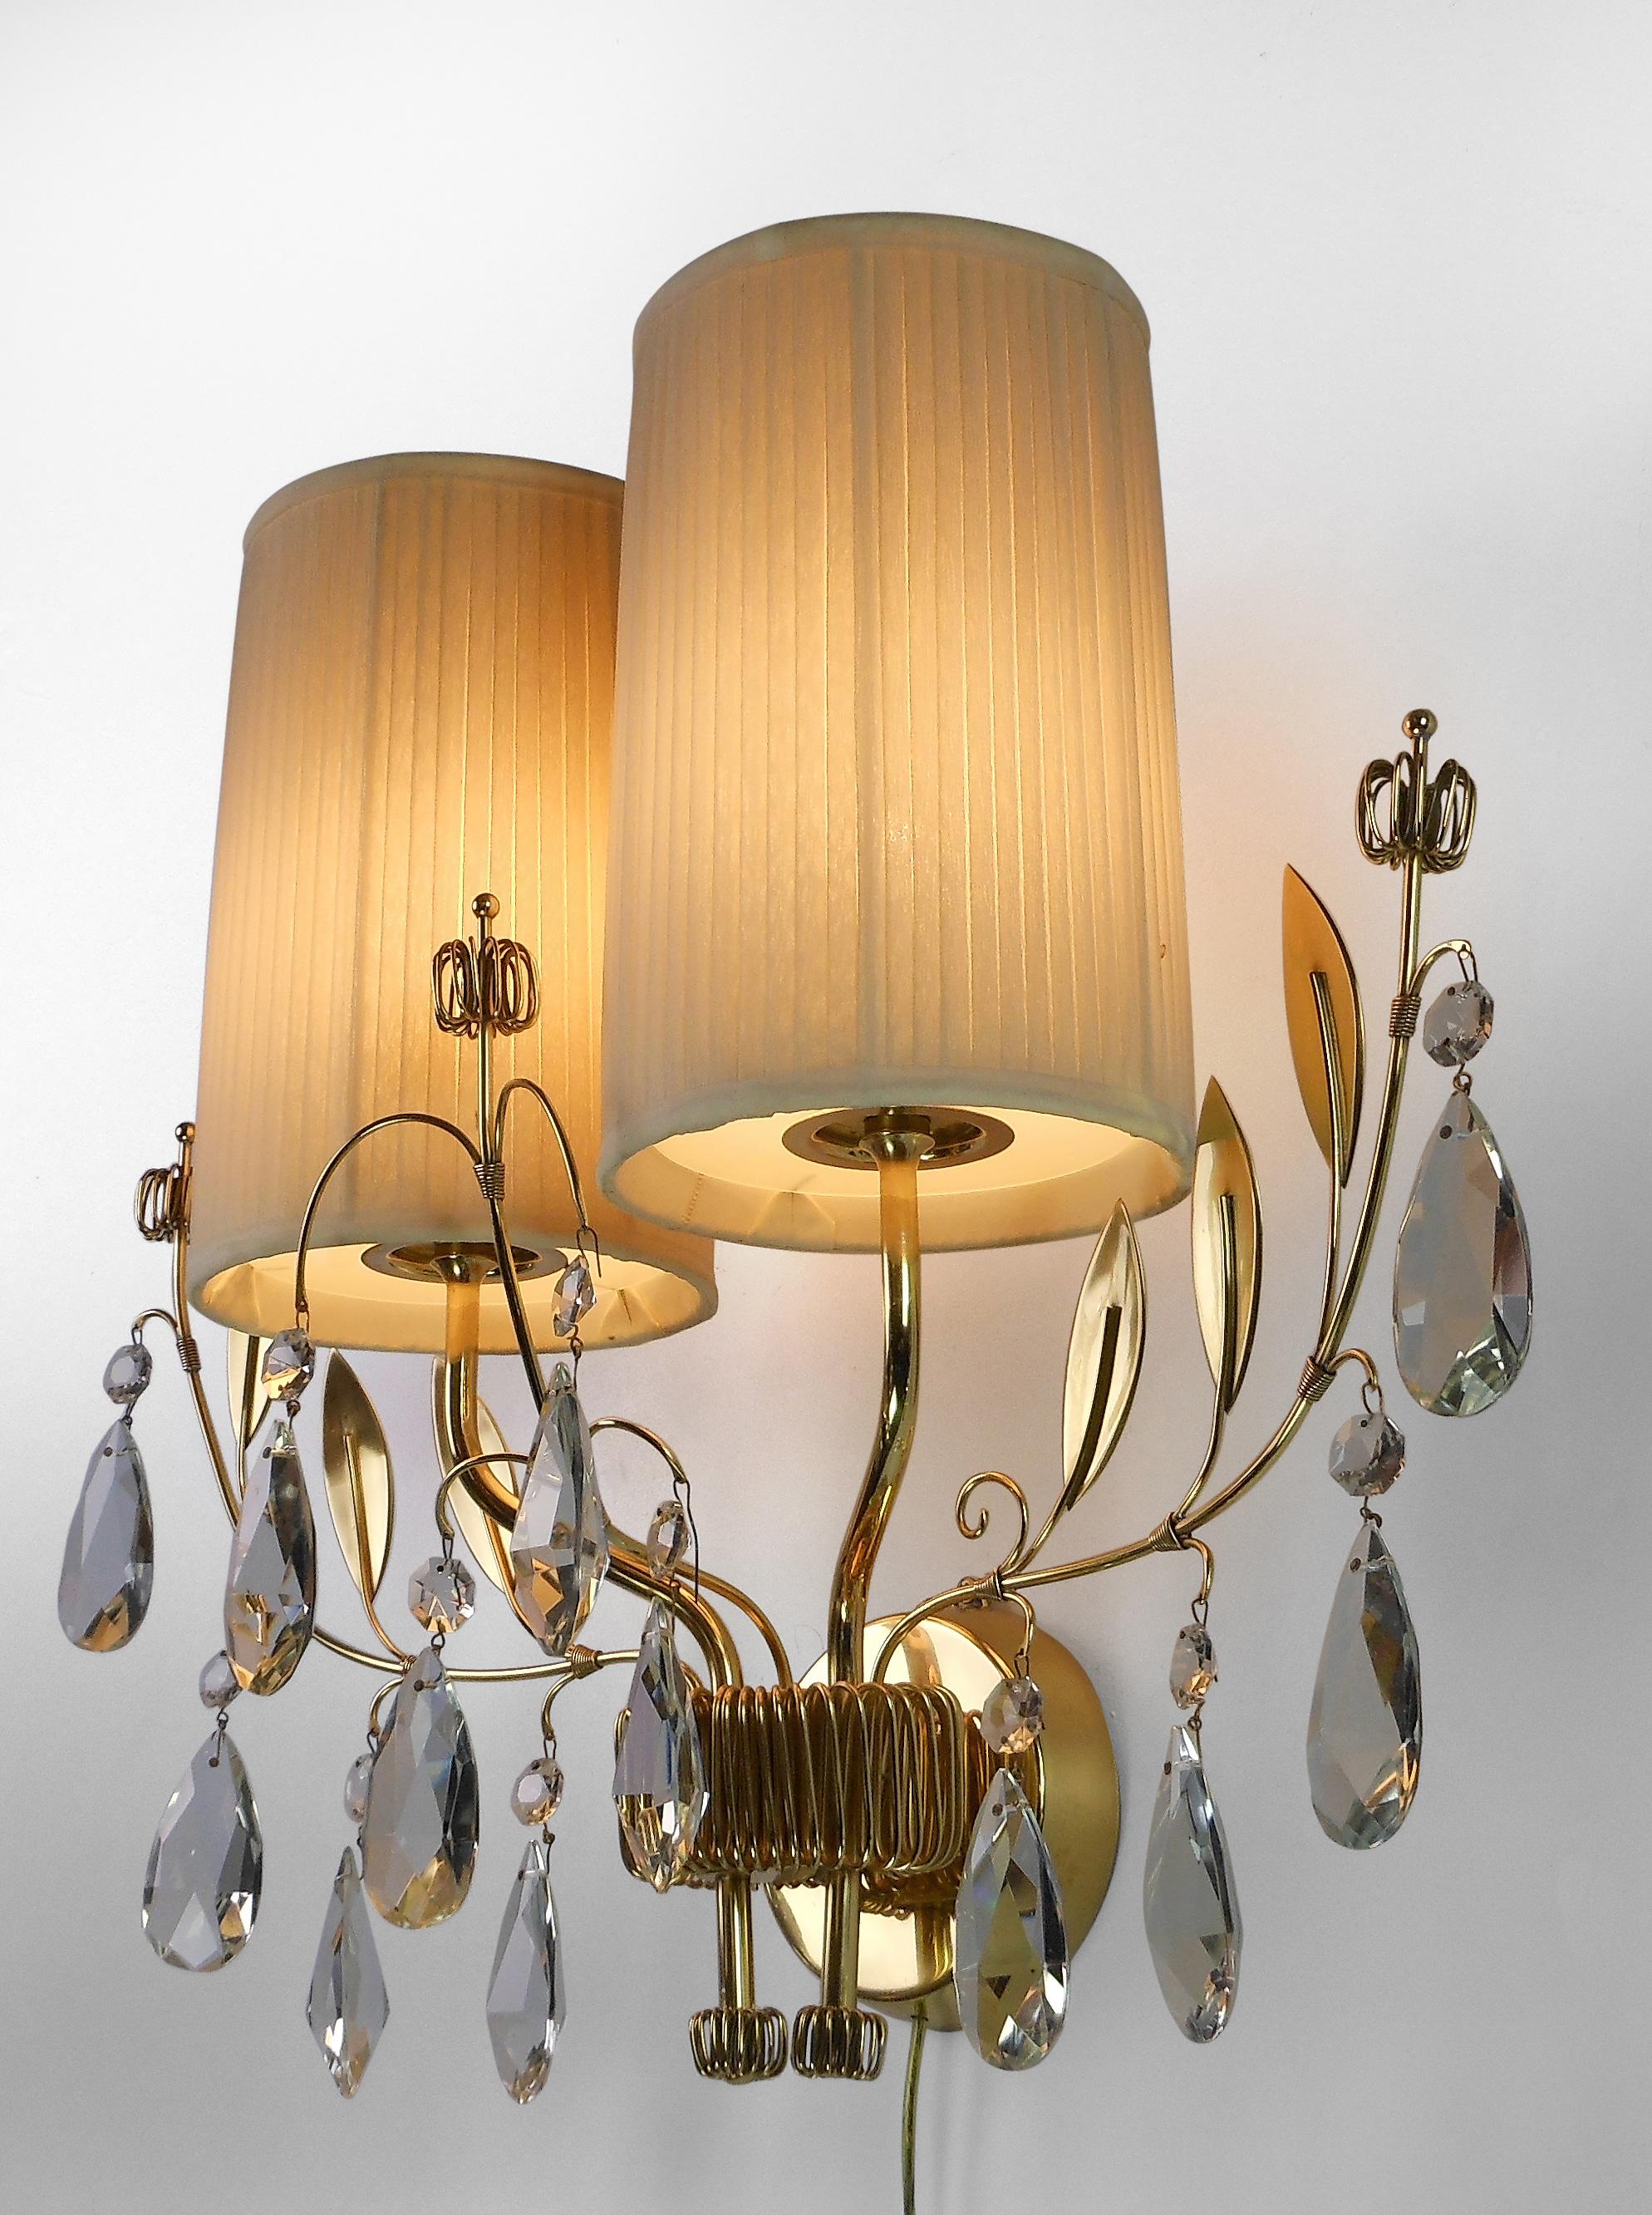 A single finnish crystal and brass sconces
Mid-20th century
This rare model possesses Tynell's distinctive leaves and flowers with sparkling crystal drops. Dignified and playful, a delightful sconce. The circular backplate issuing two s-form arms